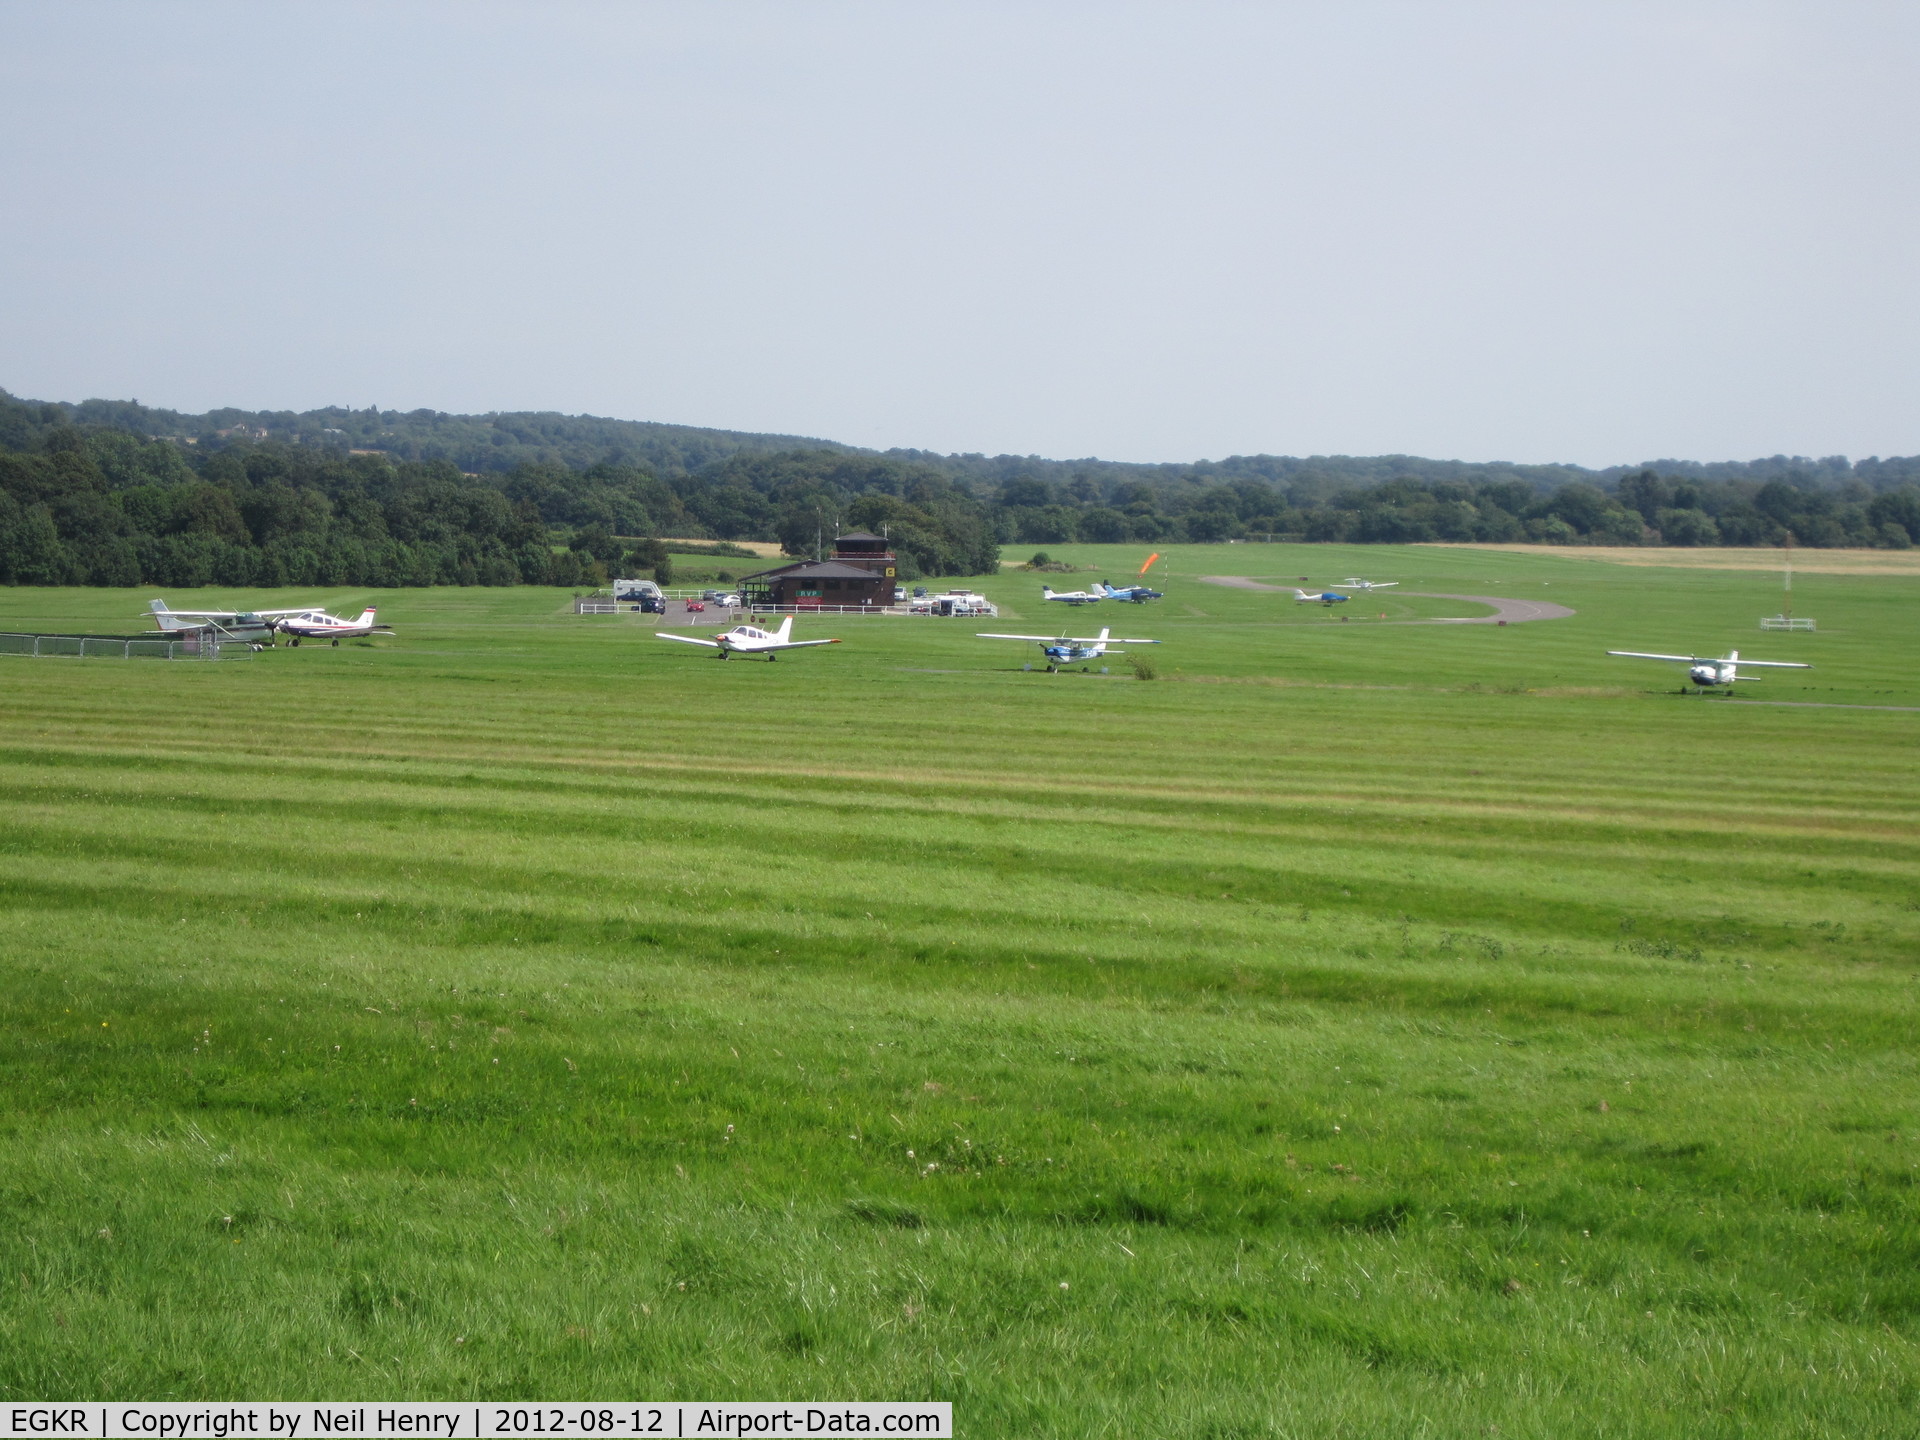 Redhill Aerodrome Airport, Redhill, England United Kingdom (EGKR) - Photo taken 12 August 2012 from adjacent field being used as car parking for Redhill Steam Rally